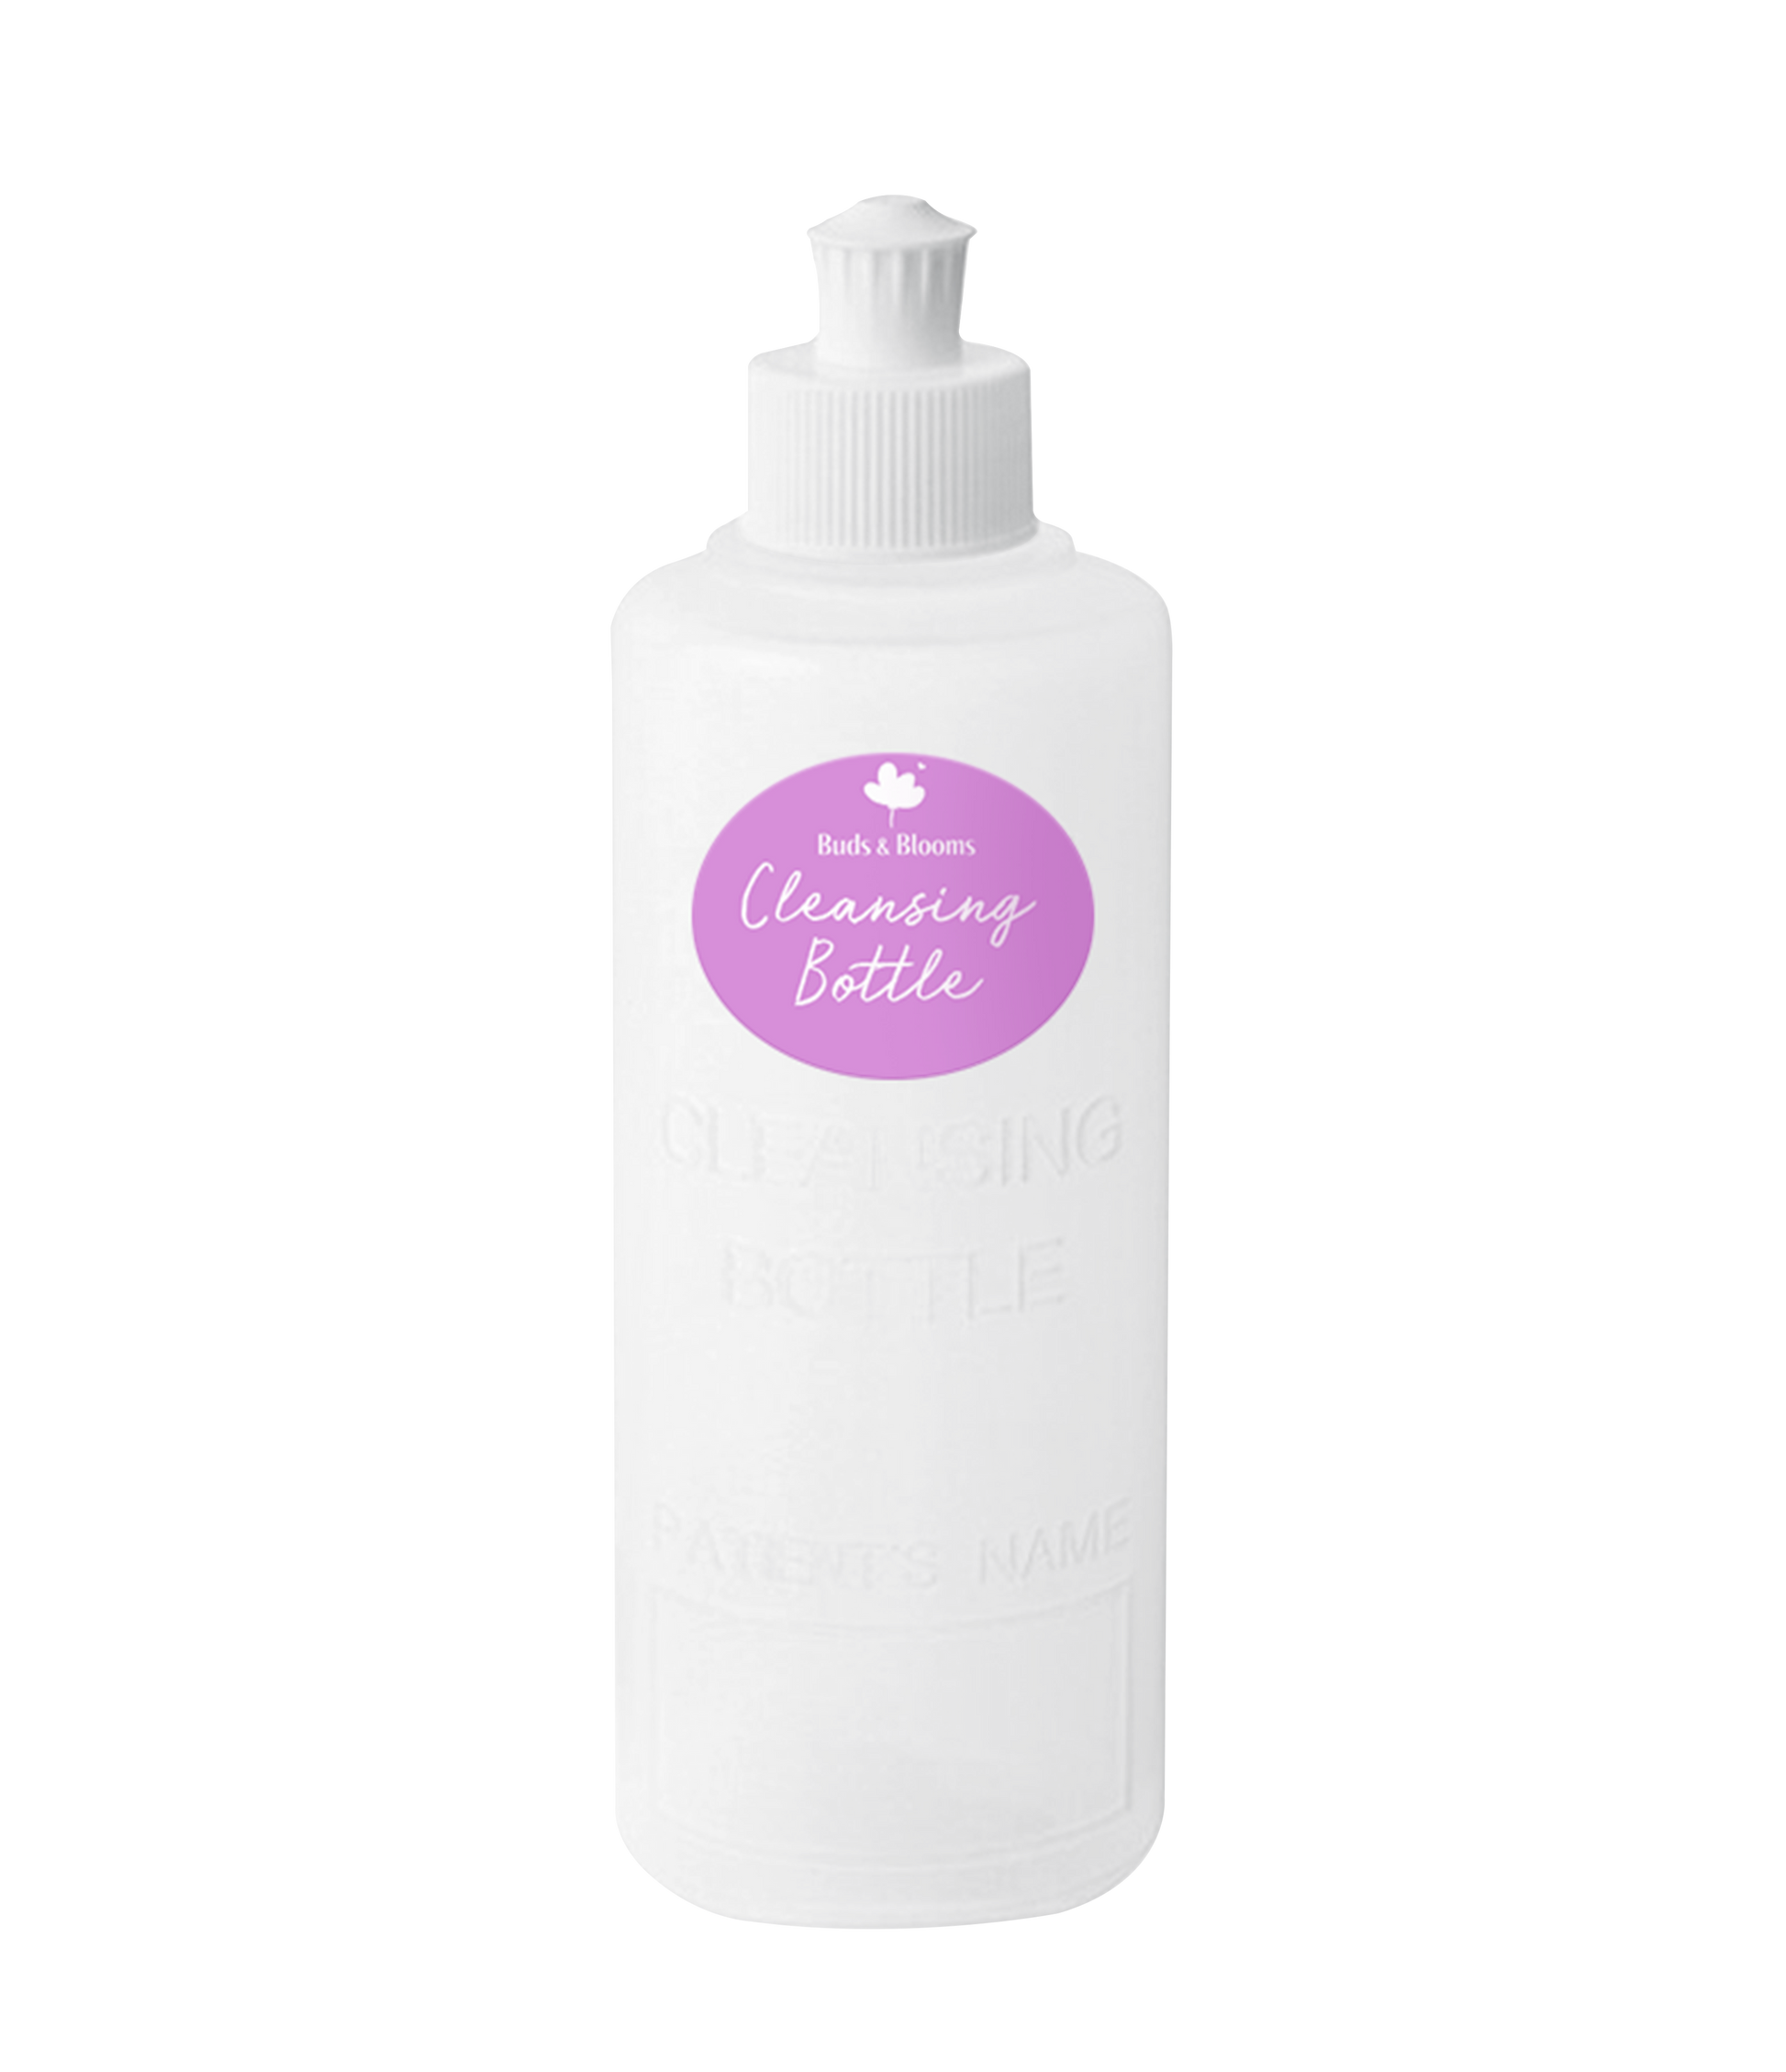 Buds and Blooms - Cleansing Peri Bottle (6543520399394)